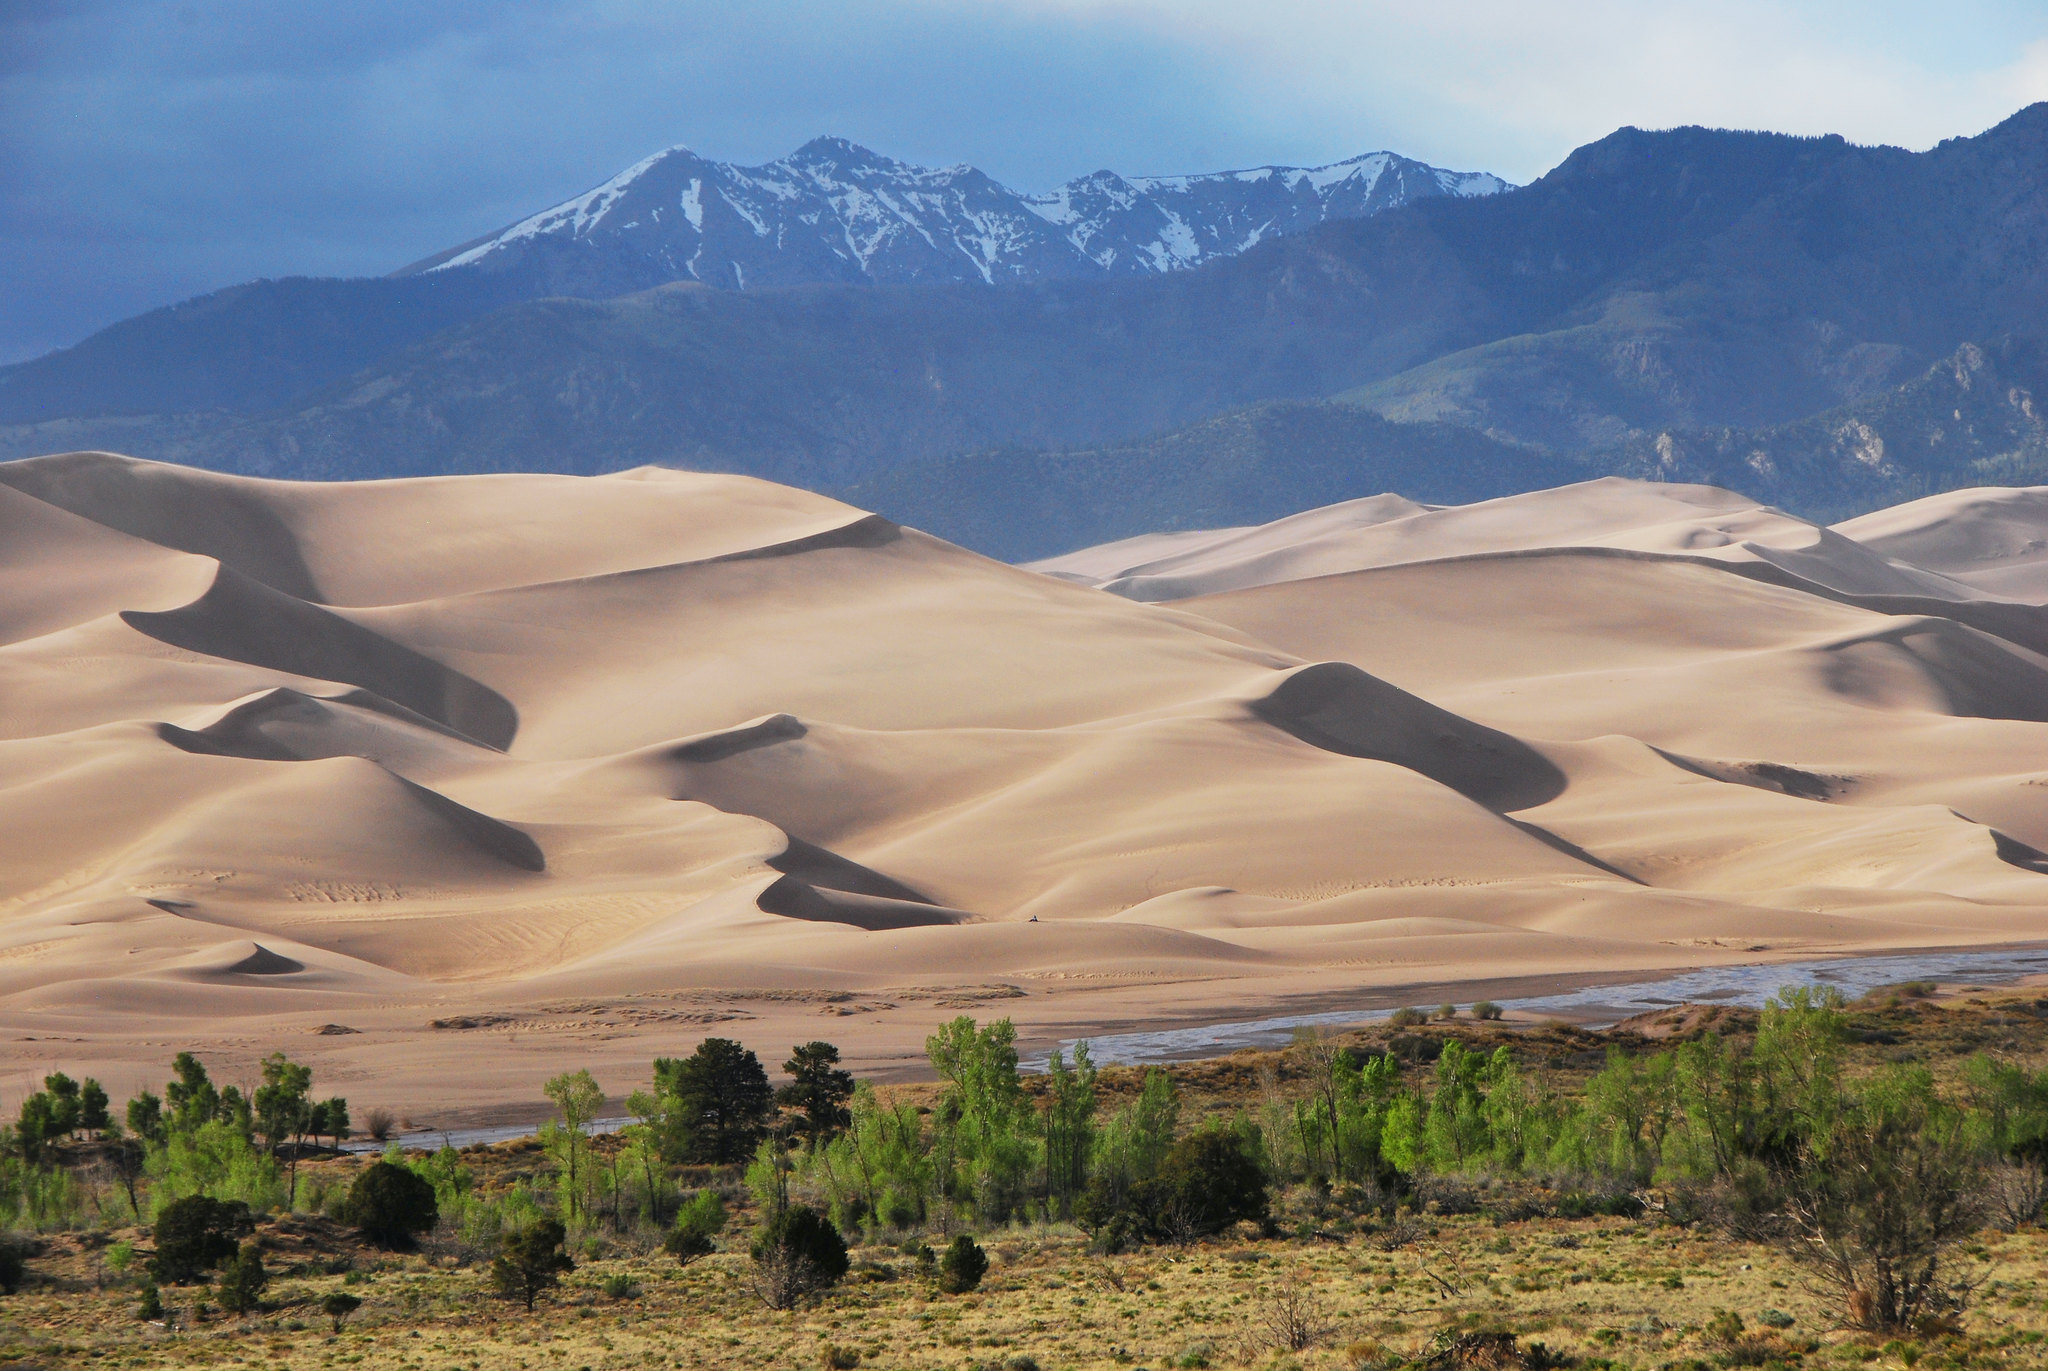 <p>Great Sand Dunes boasts the tallest sand dunes in North America, perfect for sandboarding and sledding. The park’s diverse landscape includes mountains, wetlands, and forests. Hiking to the top of the dunes offers panoramic views of the surrounding area. Medano Creek provides a refreshing spot for splashing and picnicking in the summer.</p>